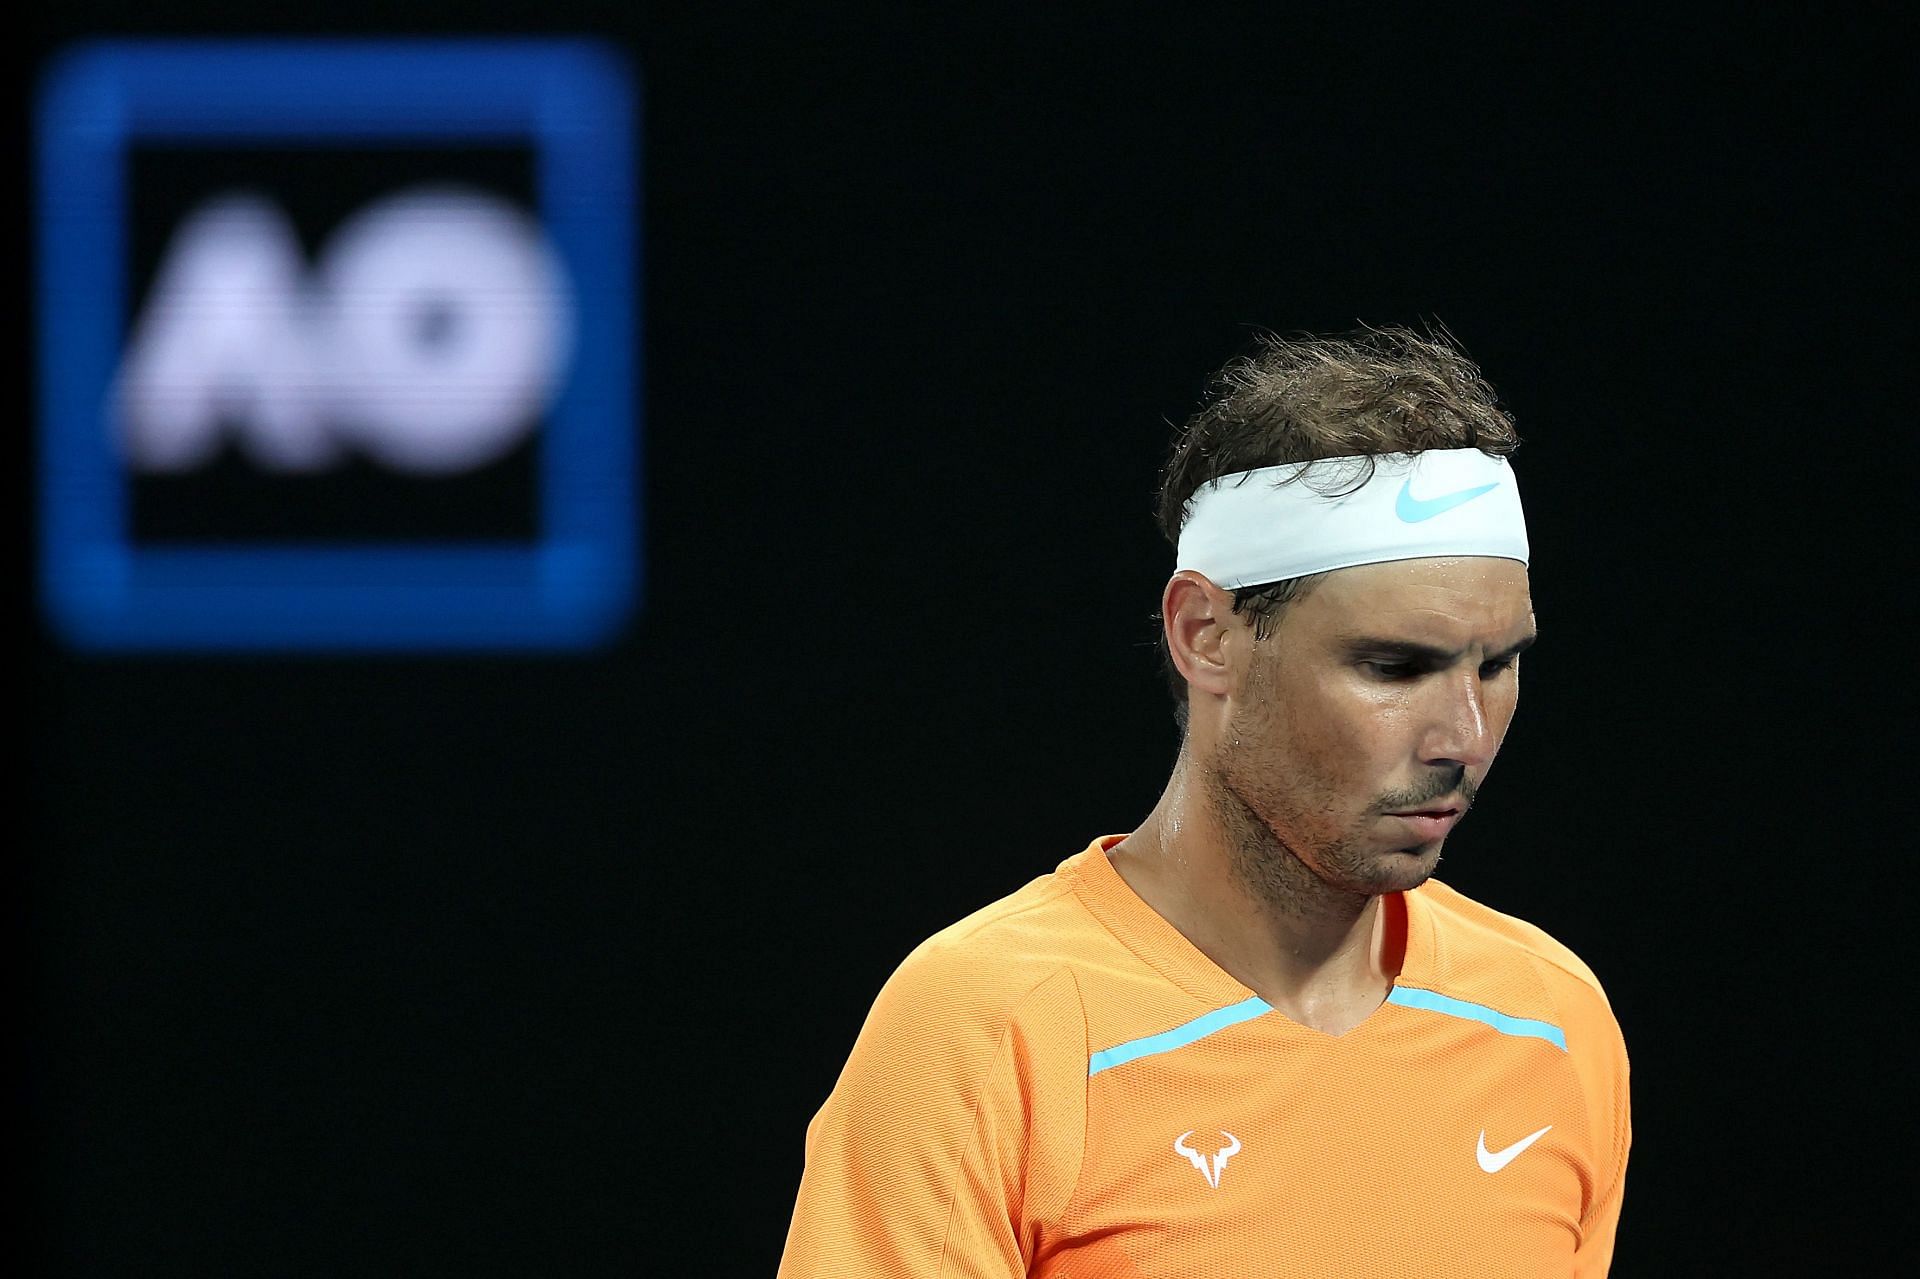 The World No. 6 during the 2023 Australian Open